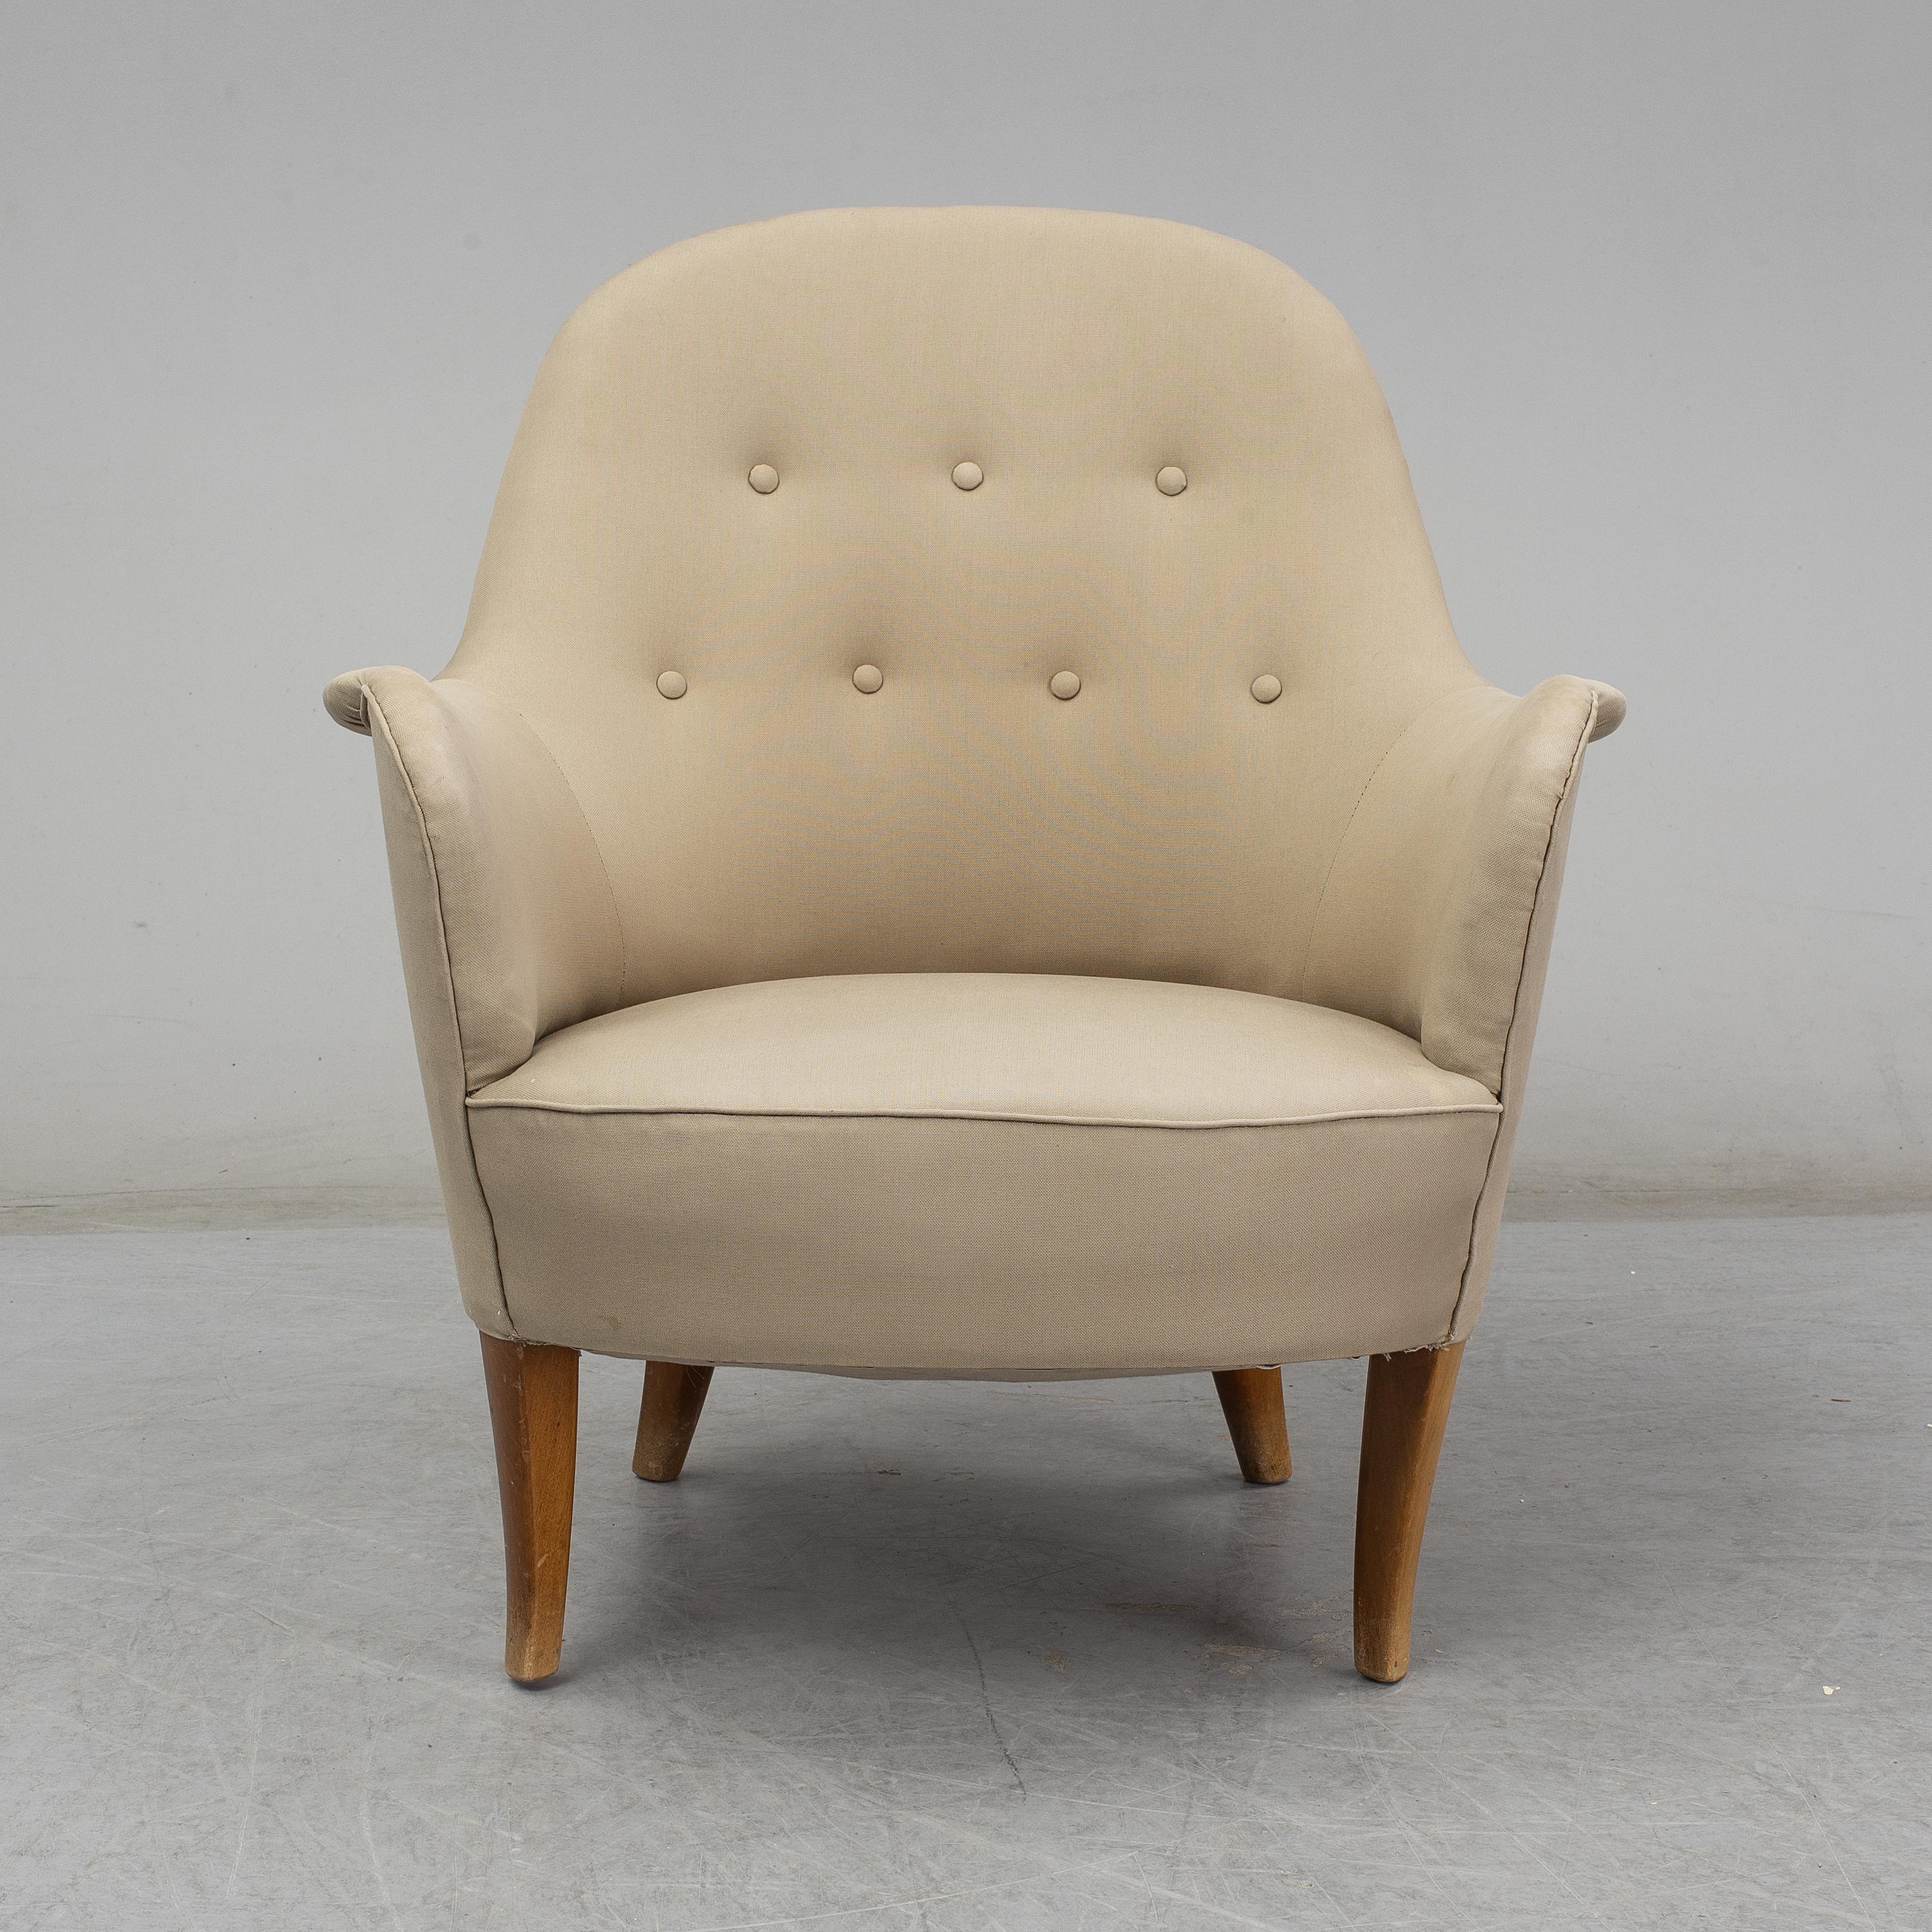 A second half of the 20th century easy chair by Carl Malmsten. Makers mark on piece.
Later upholstery.
Re-upholstery services available upon request with COM fabric or from our collection. Inquire for pricing as well as fabric samples.